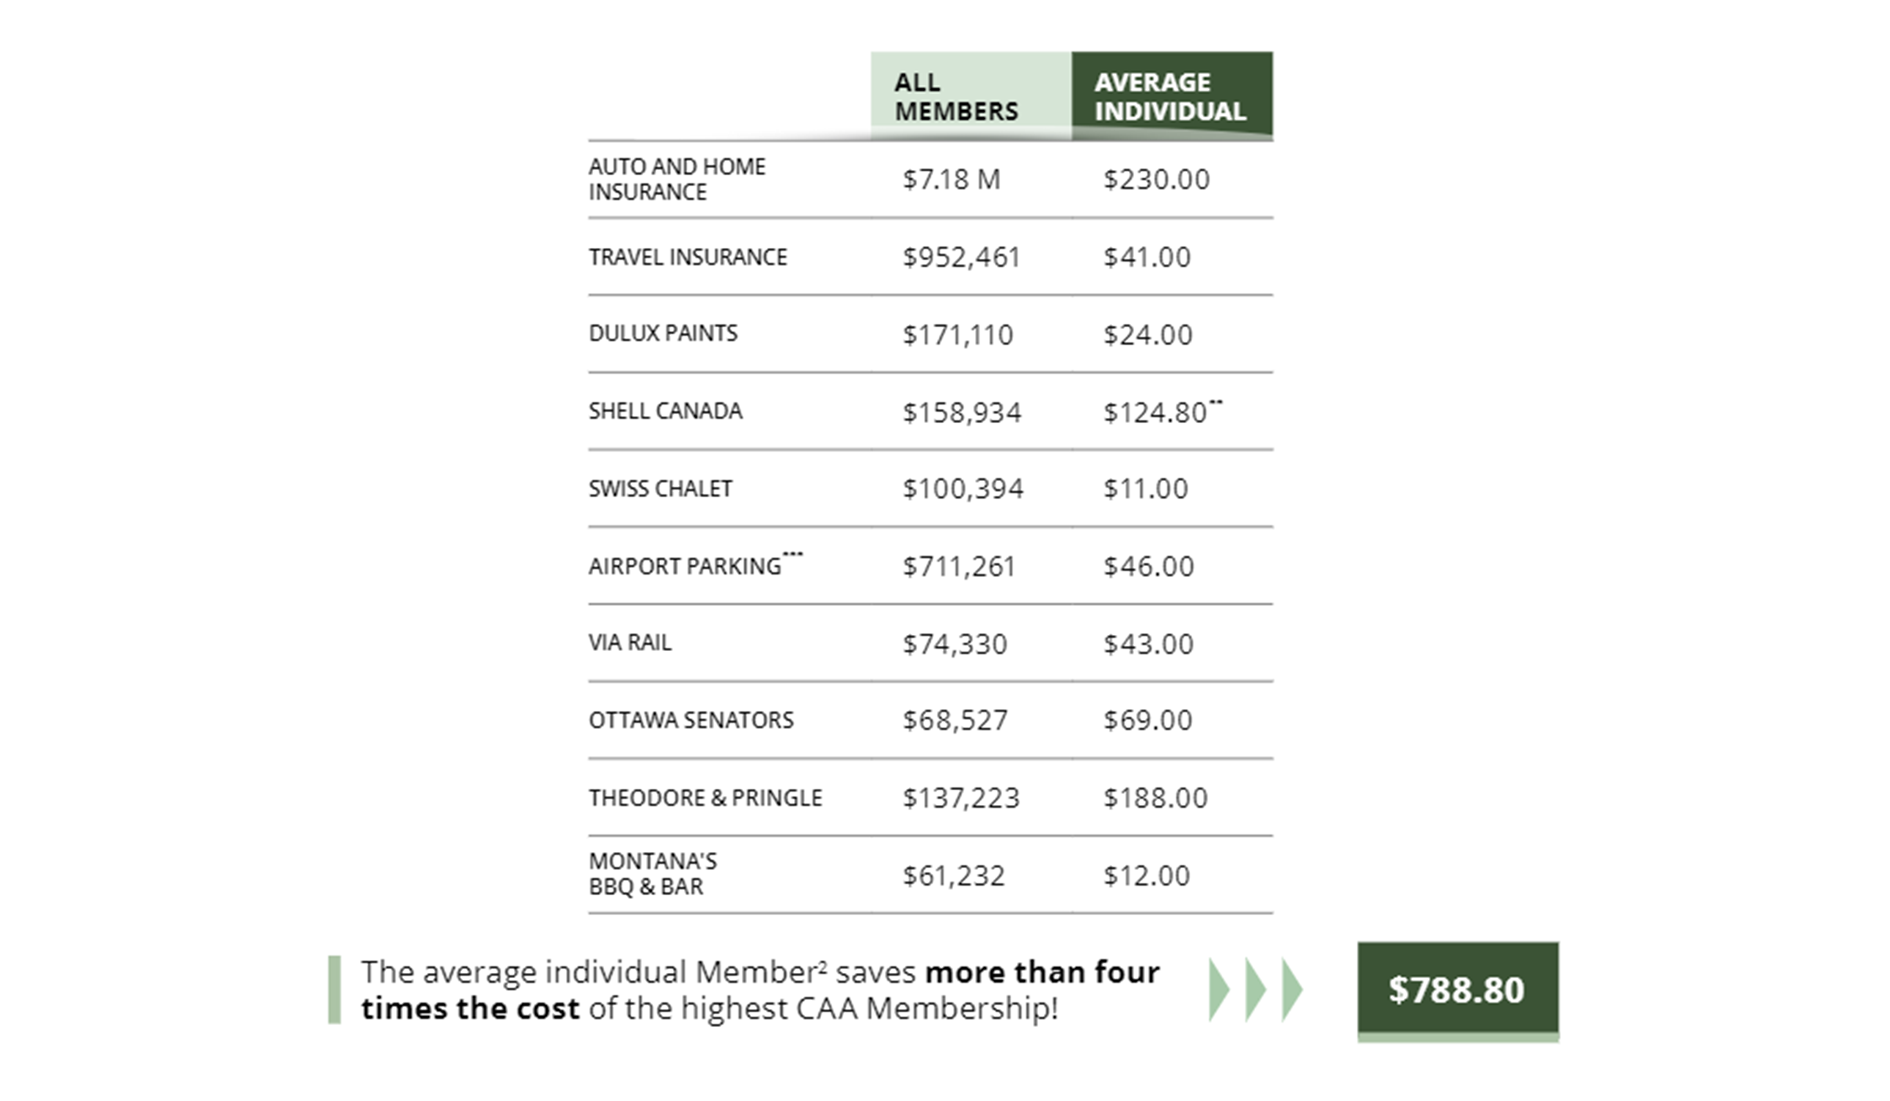 Chart showing the average savings of all Members vs average individual Members by using CAA Member benefits.